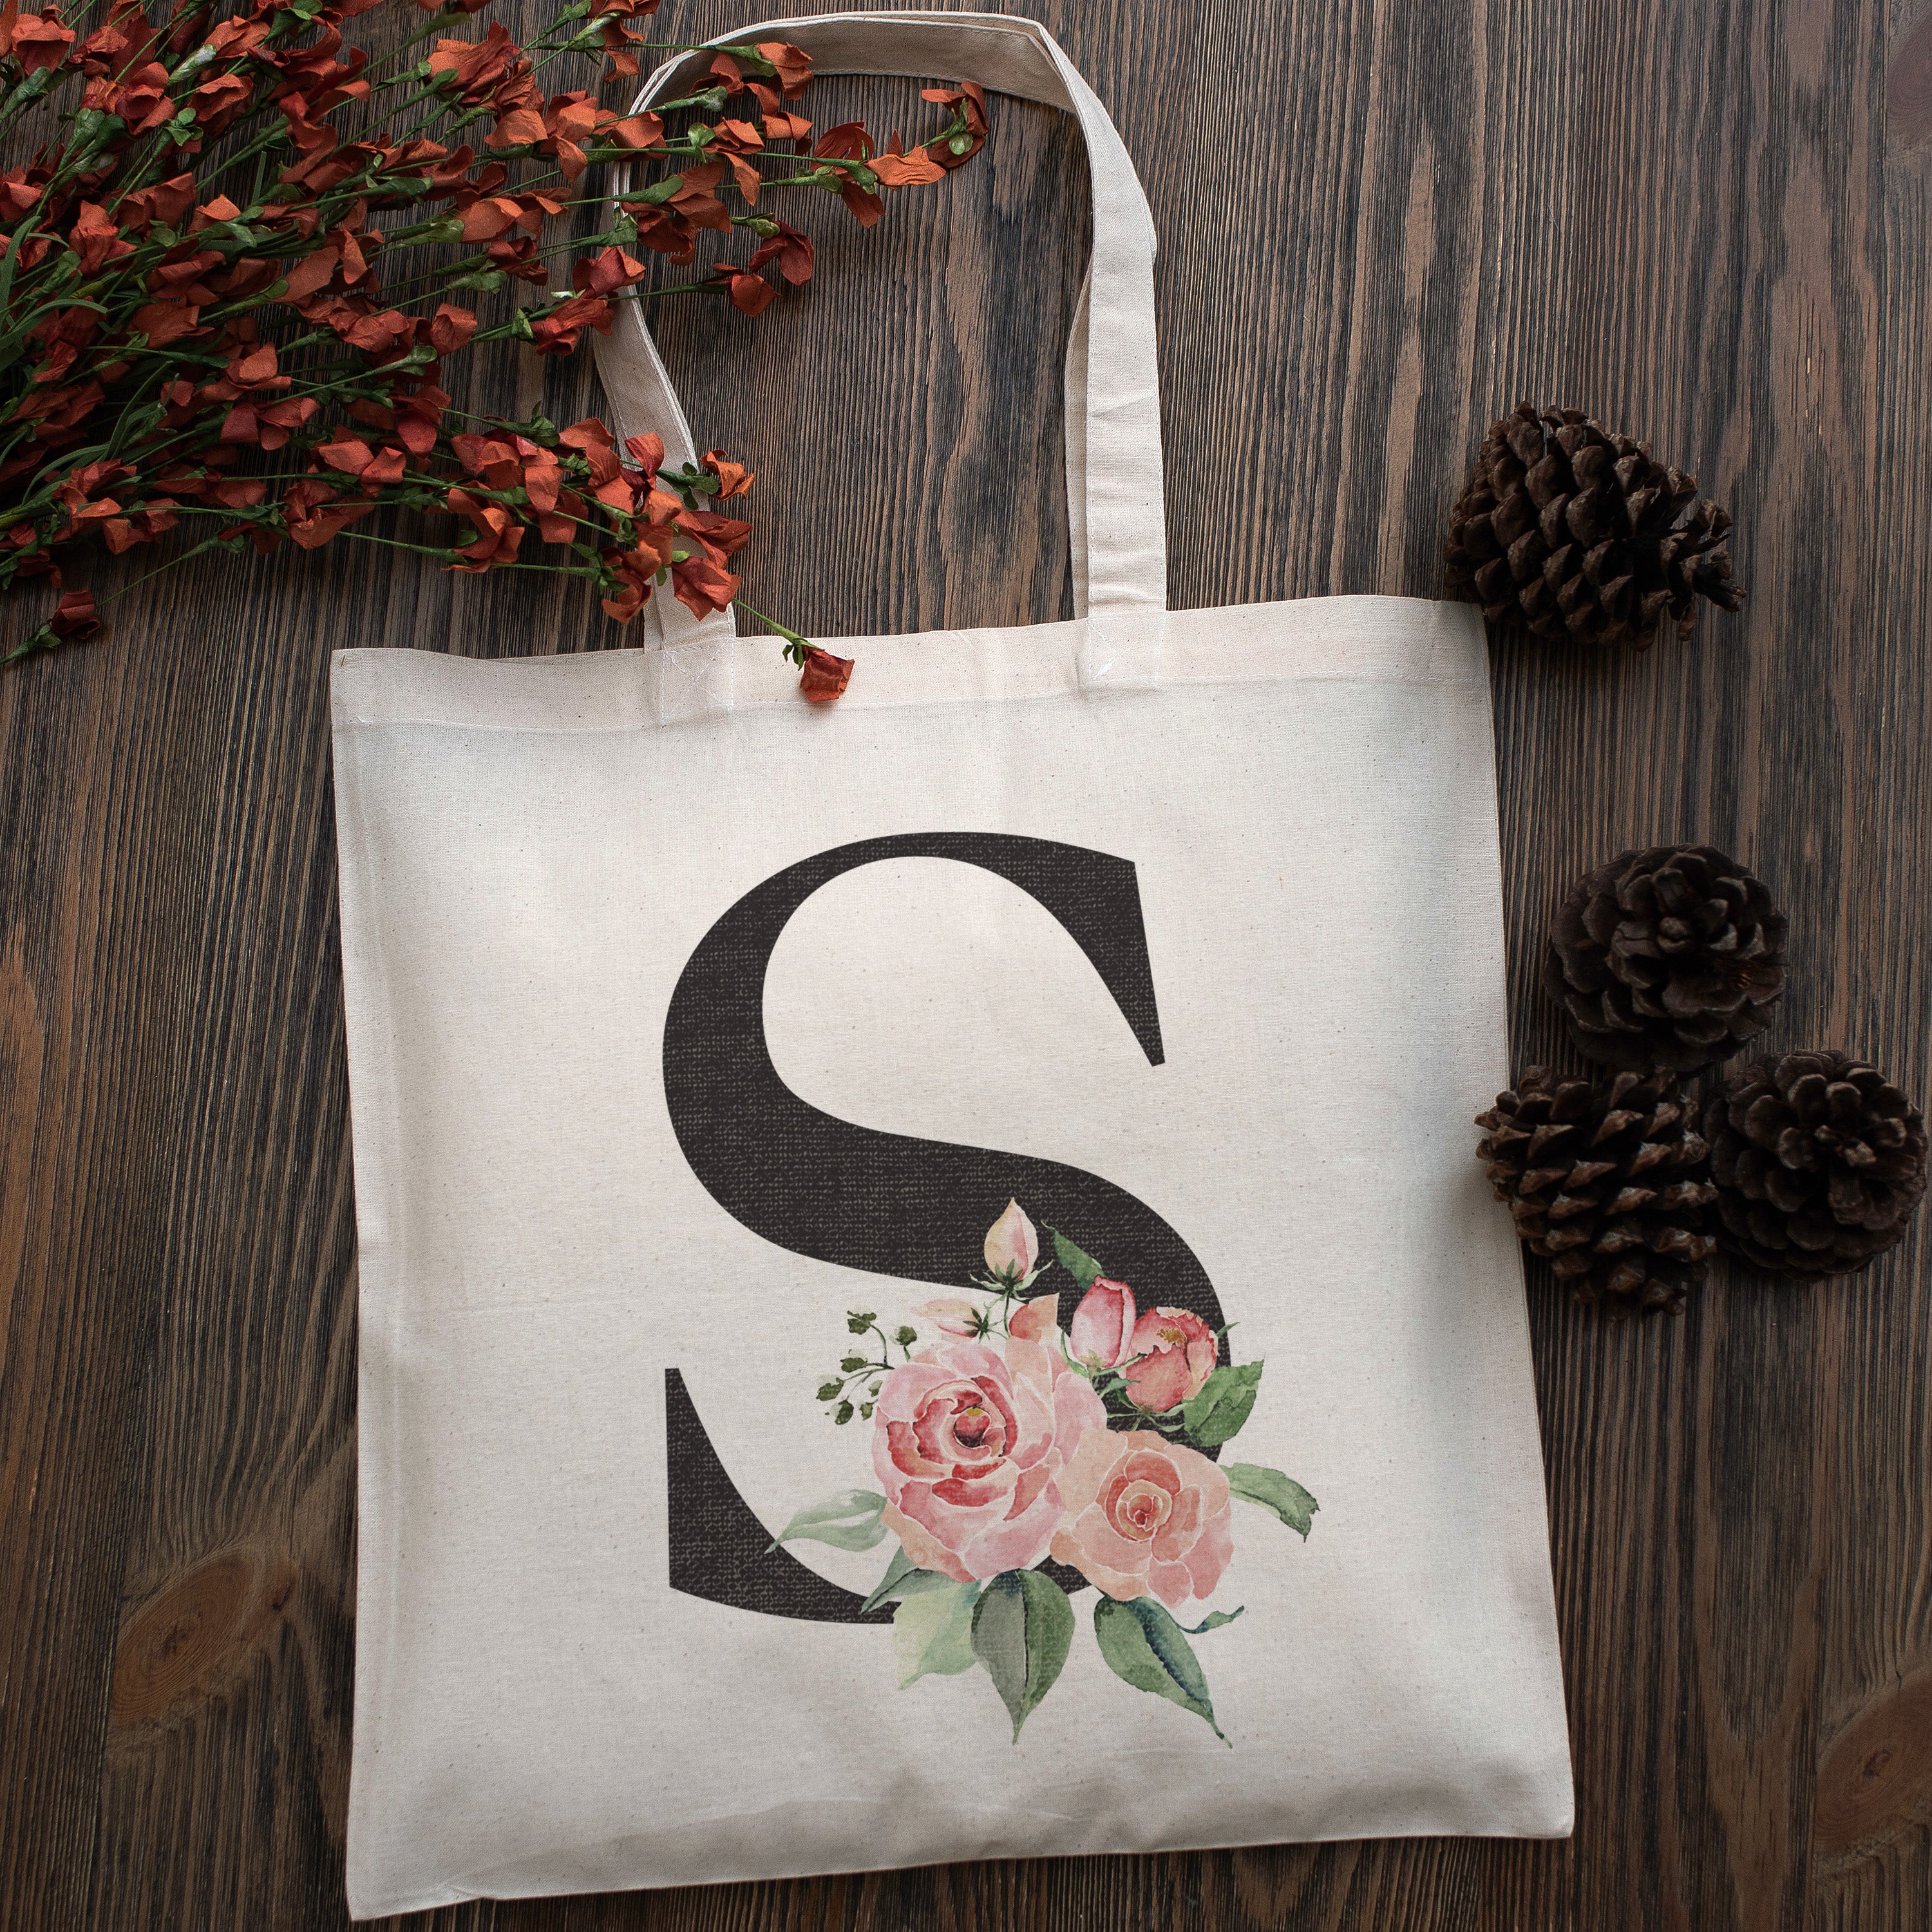 Zexpa Apparel Personalized Grandma Tote Bag Gifts from Grandkids w/Names,  Customized Grandparent Floral Totes Bags